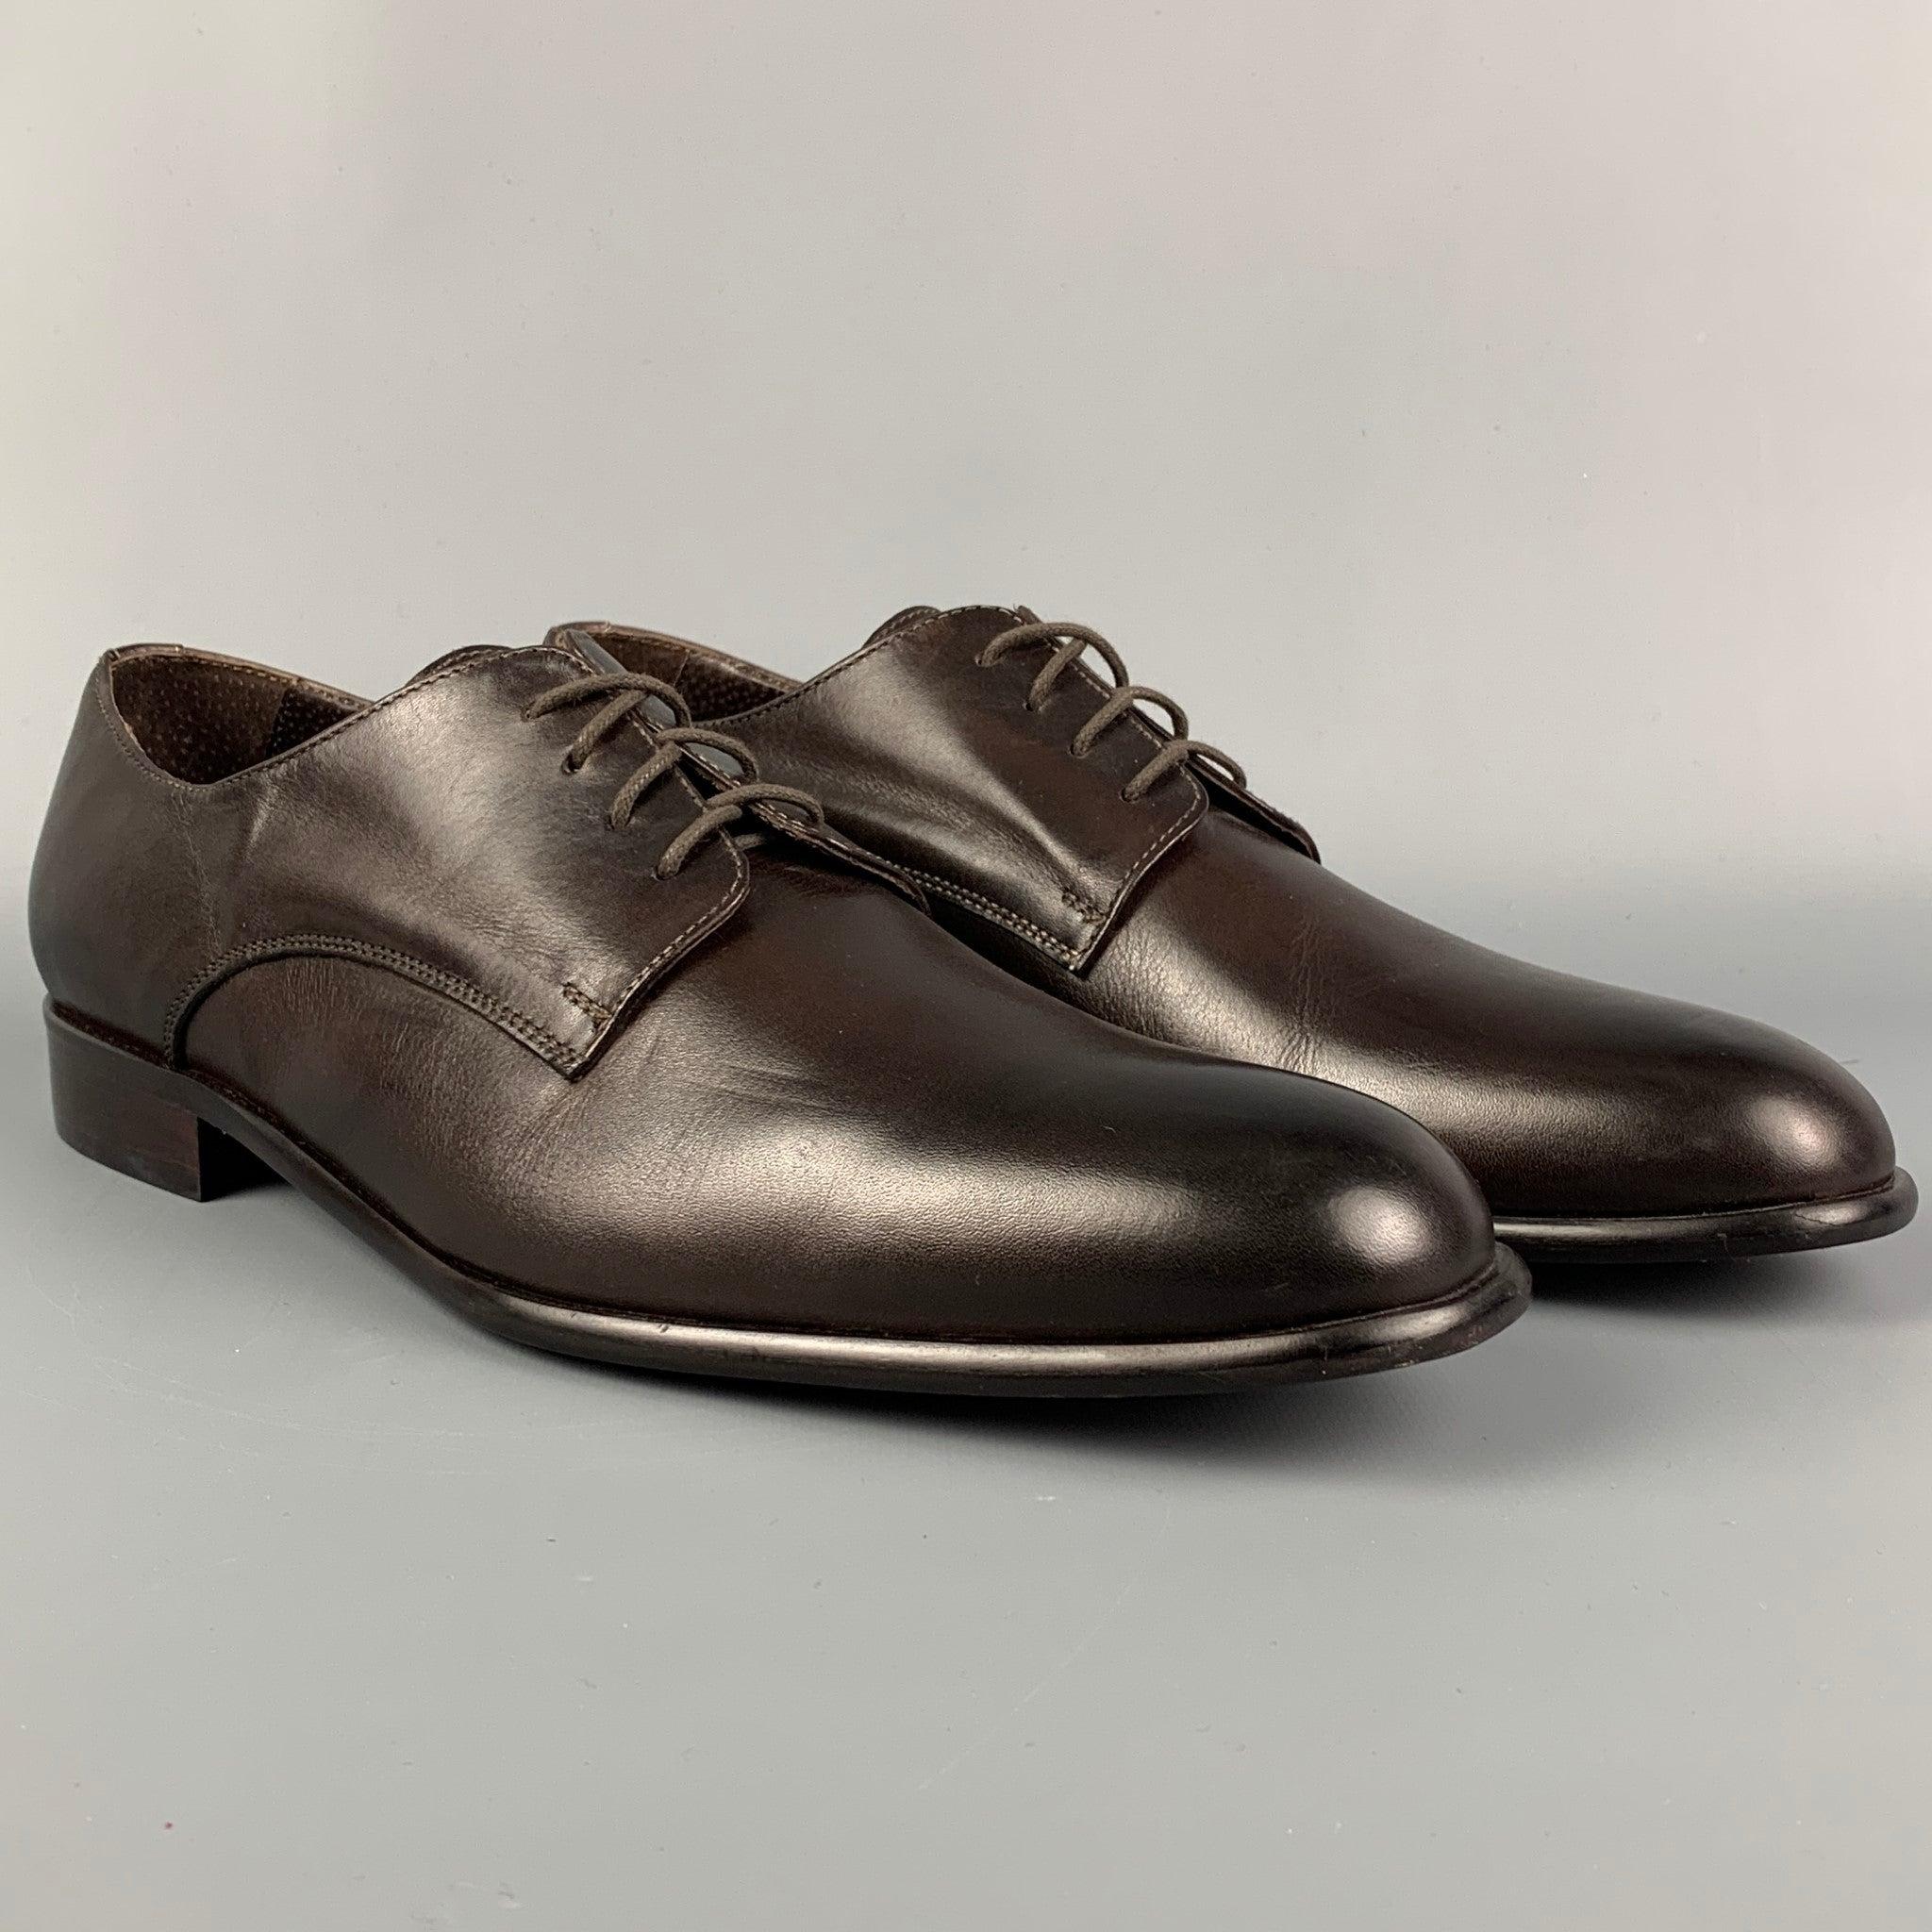 JOHN GALLIANO dress shoes comes in a brown leather featuring a square toe and a lace up closure. Made in Italy.
Excellent
Pre-Owned Condition. 

Marked:   44Outsole: 12.5 inches  x 4 inches 
  
  
 
Reference: 114214
Category: Lace Up Shoes
More